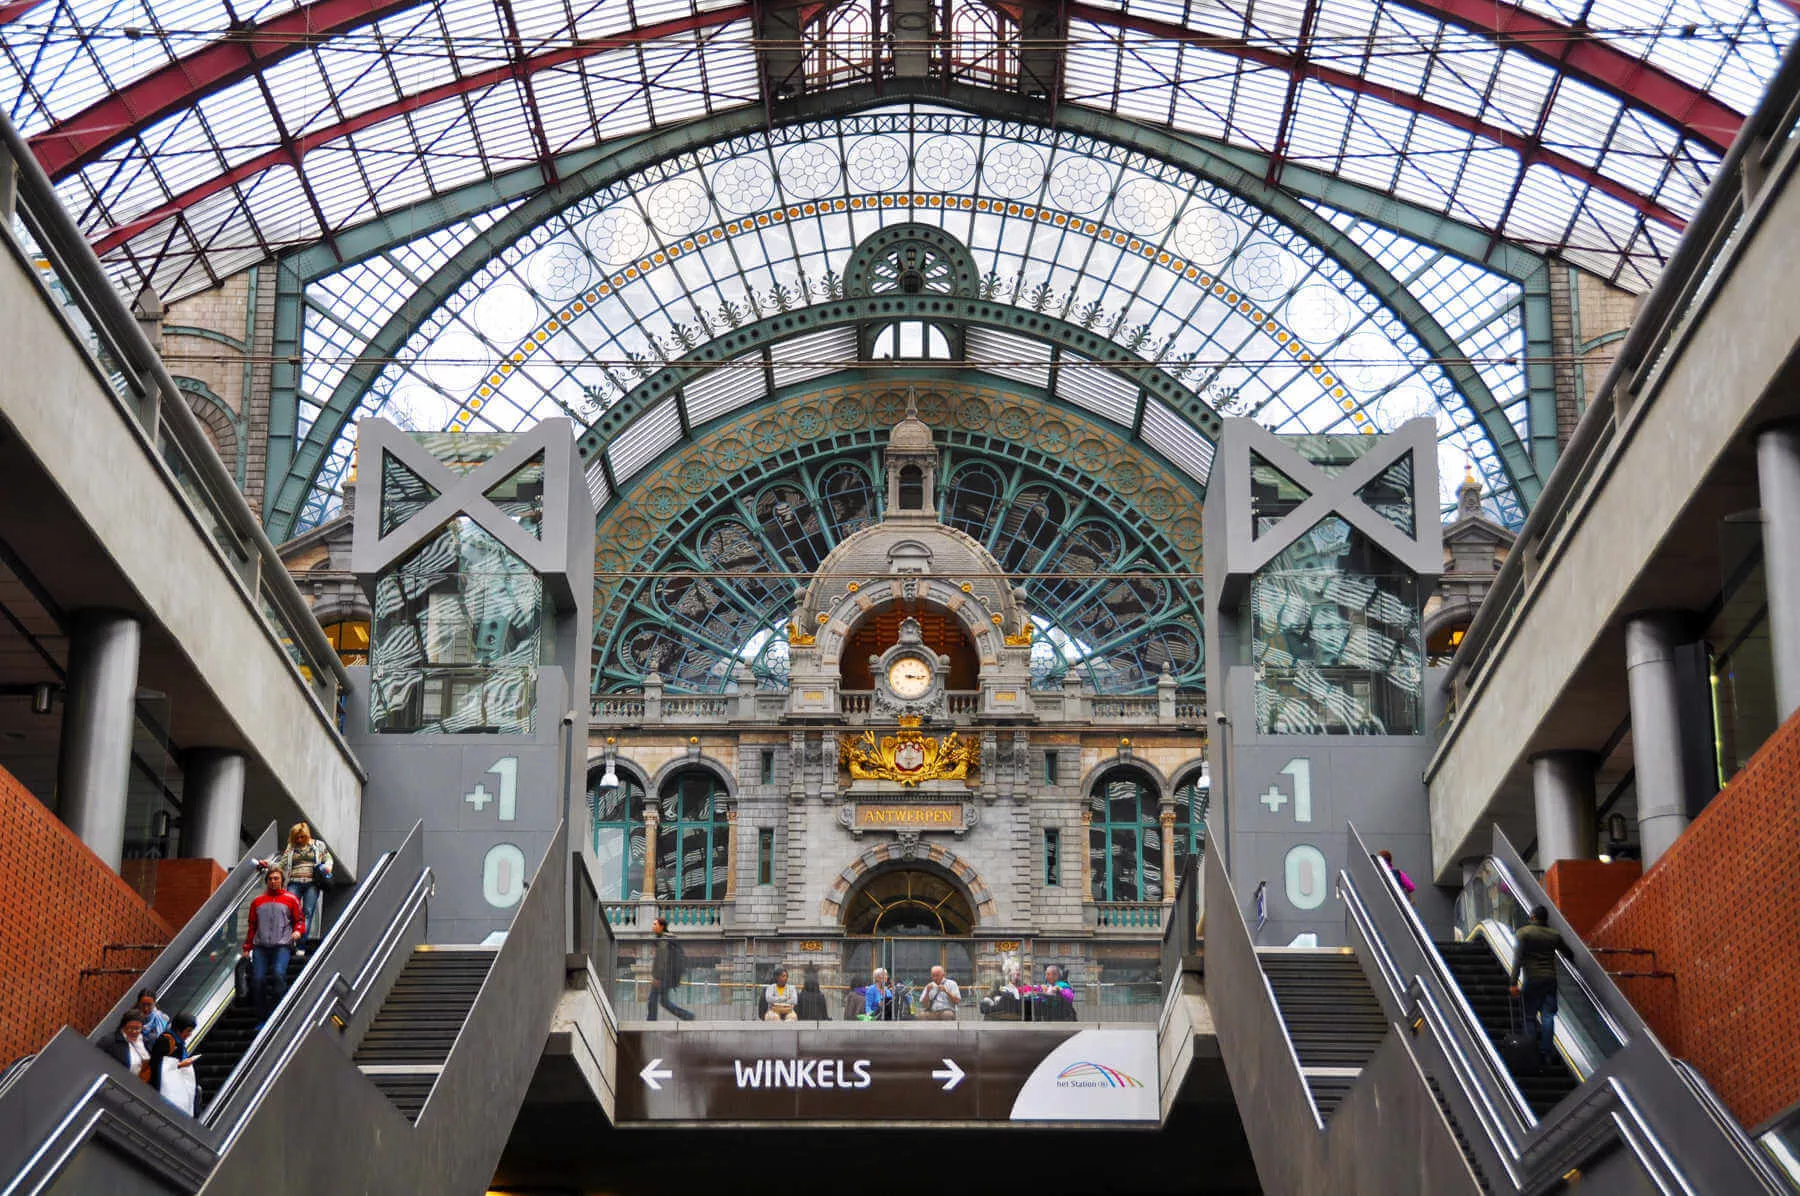 As soon as you step off the train in Antwerp, you're in a major attraction — its Industrial Age train station